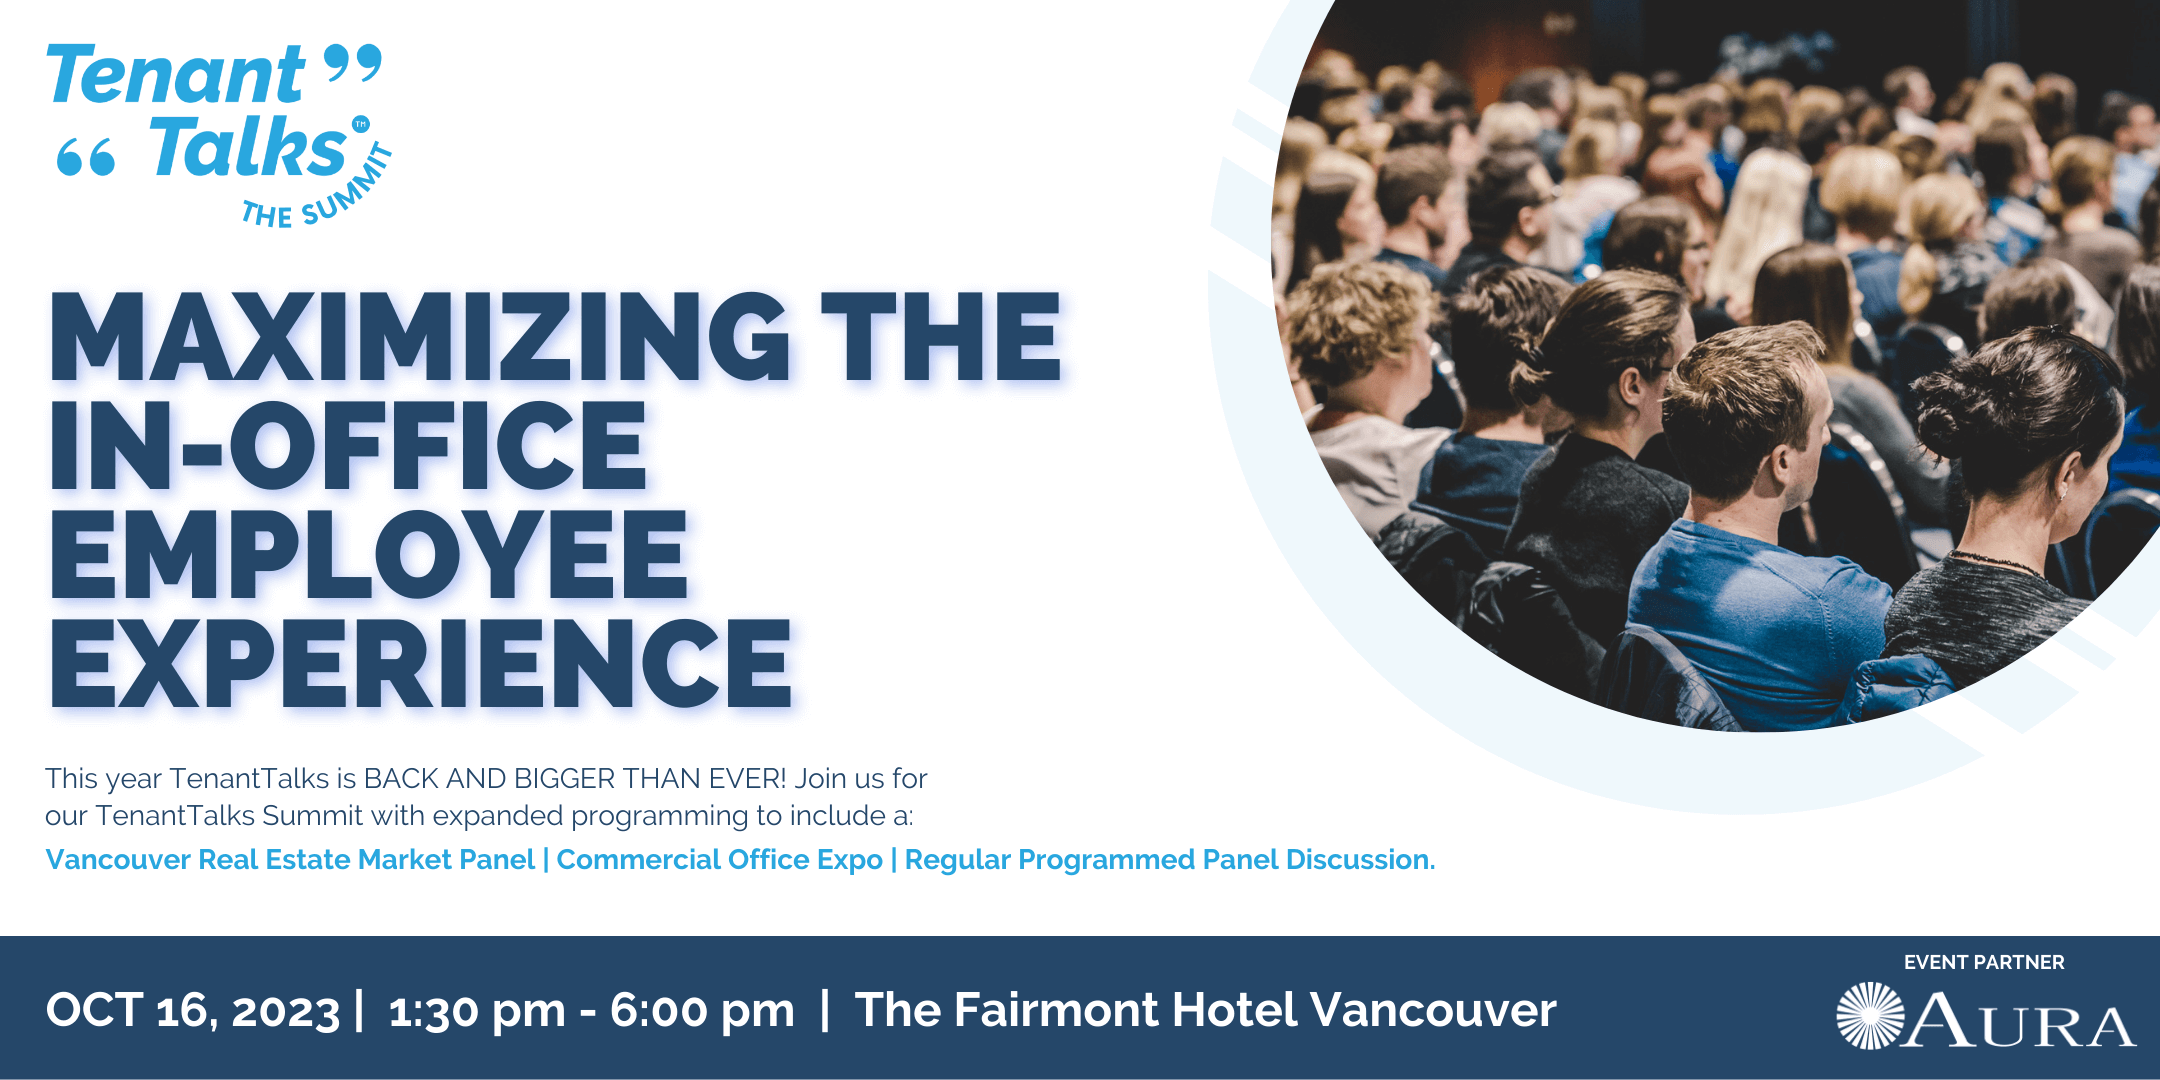 Maximizing the In-office Employee Experience- Vancouver Event